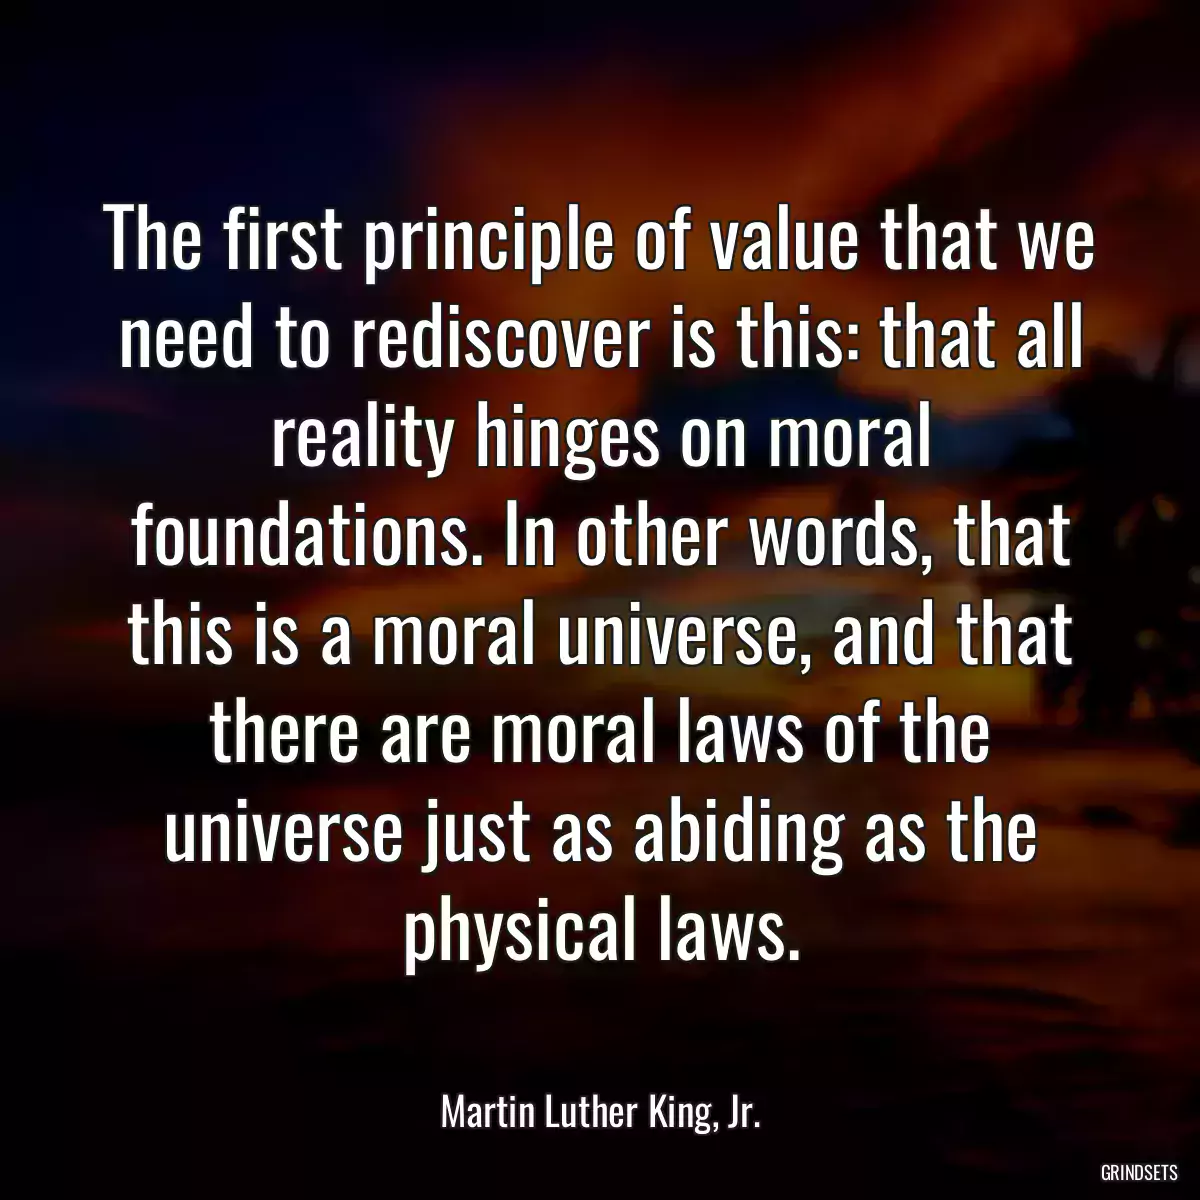 The first principle of value that we need to rediscover is this: that all reality hinges on moral foundations. In other words, that this is a moral universe, and that there are moral laws of the universe just as abiding as the physical laws.